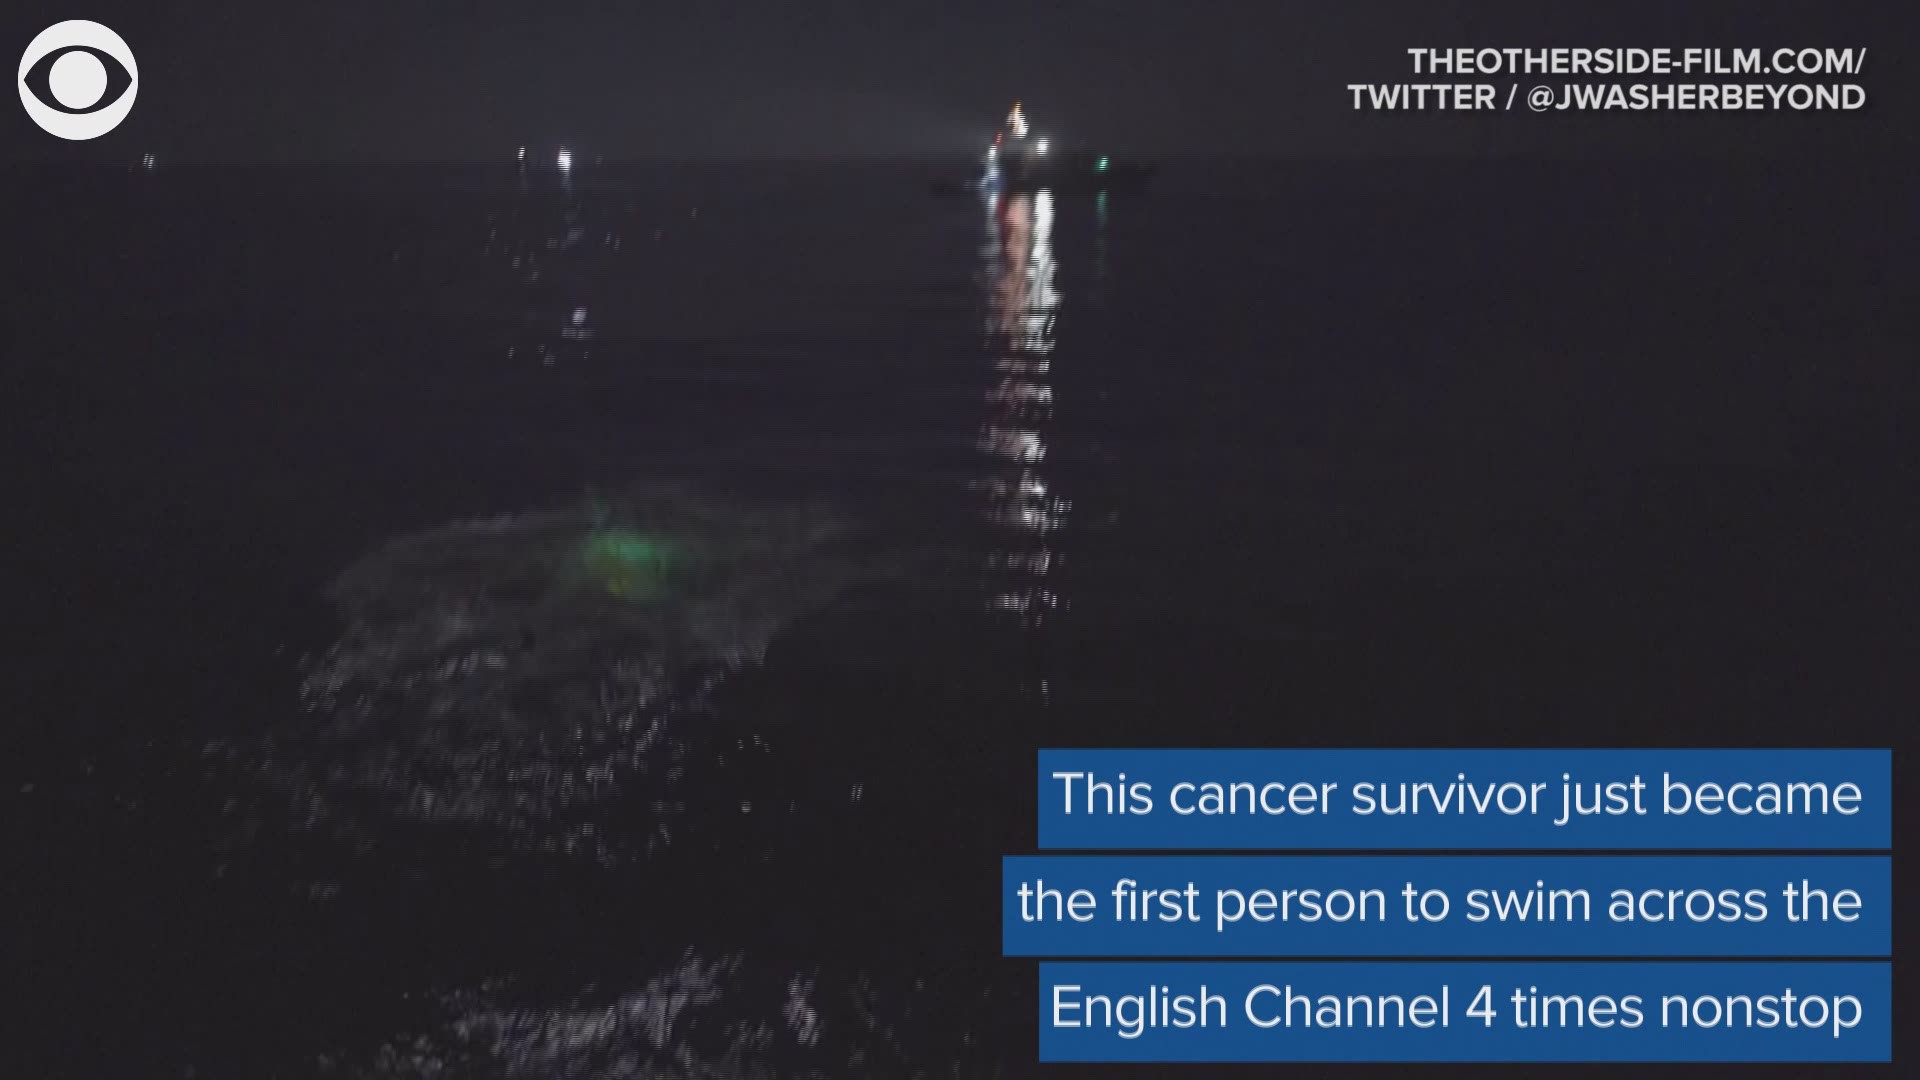 An American cancer survivor just broke a record after swimming across the English Channel 4 times in a row.